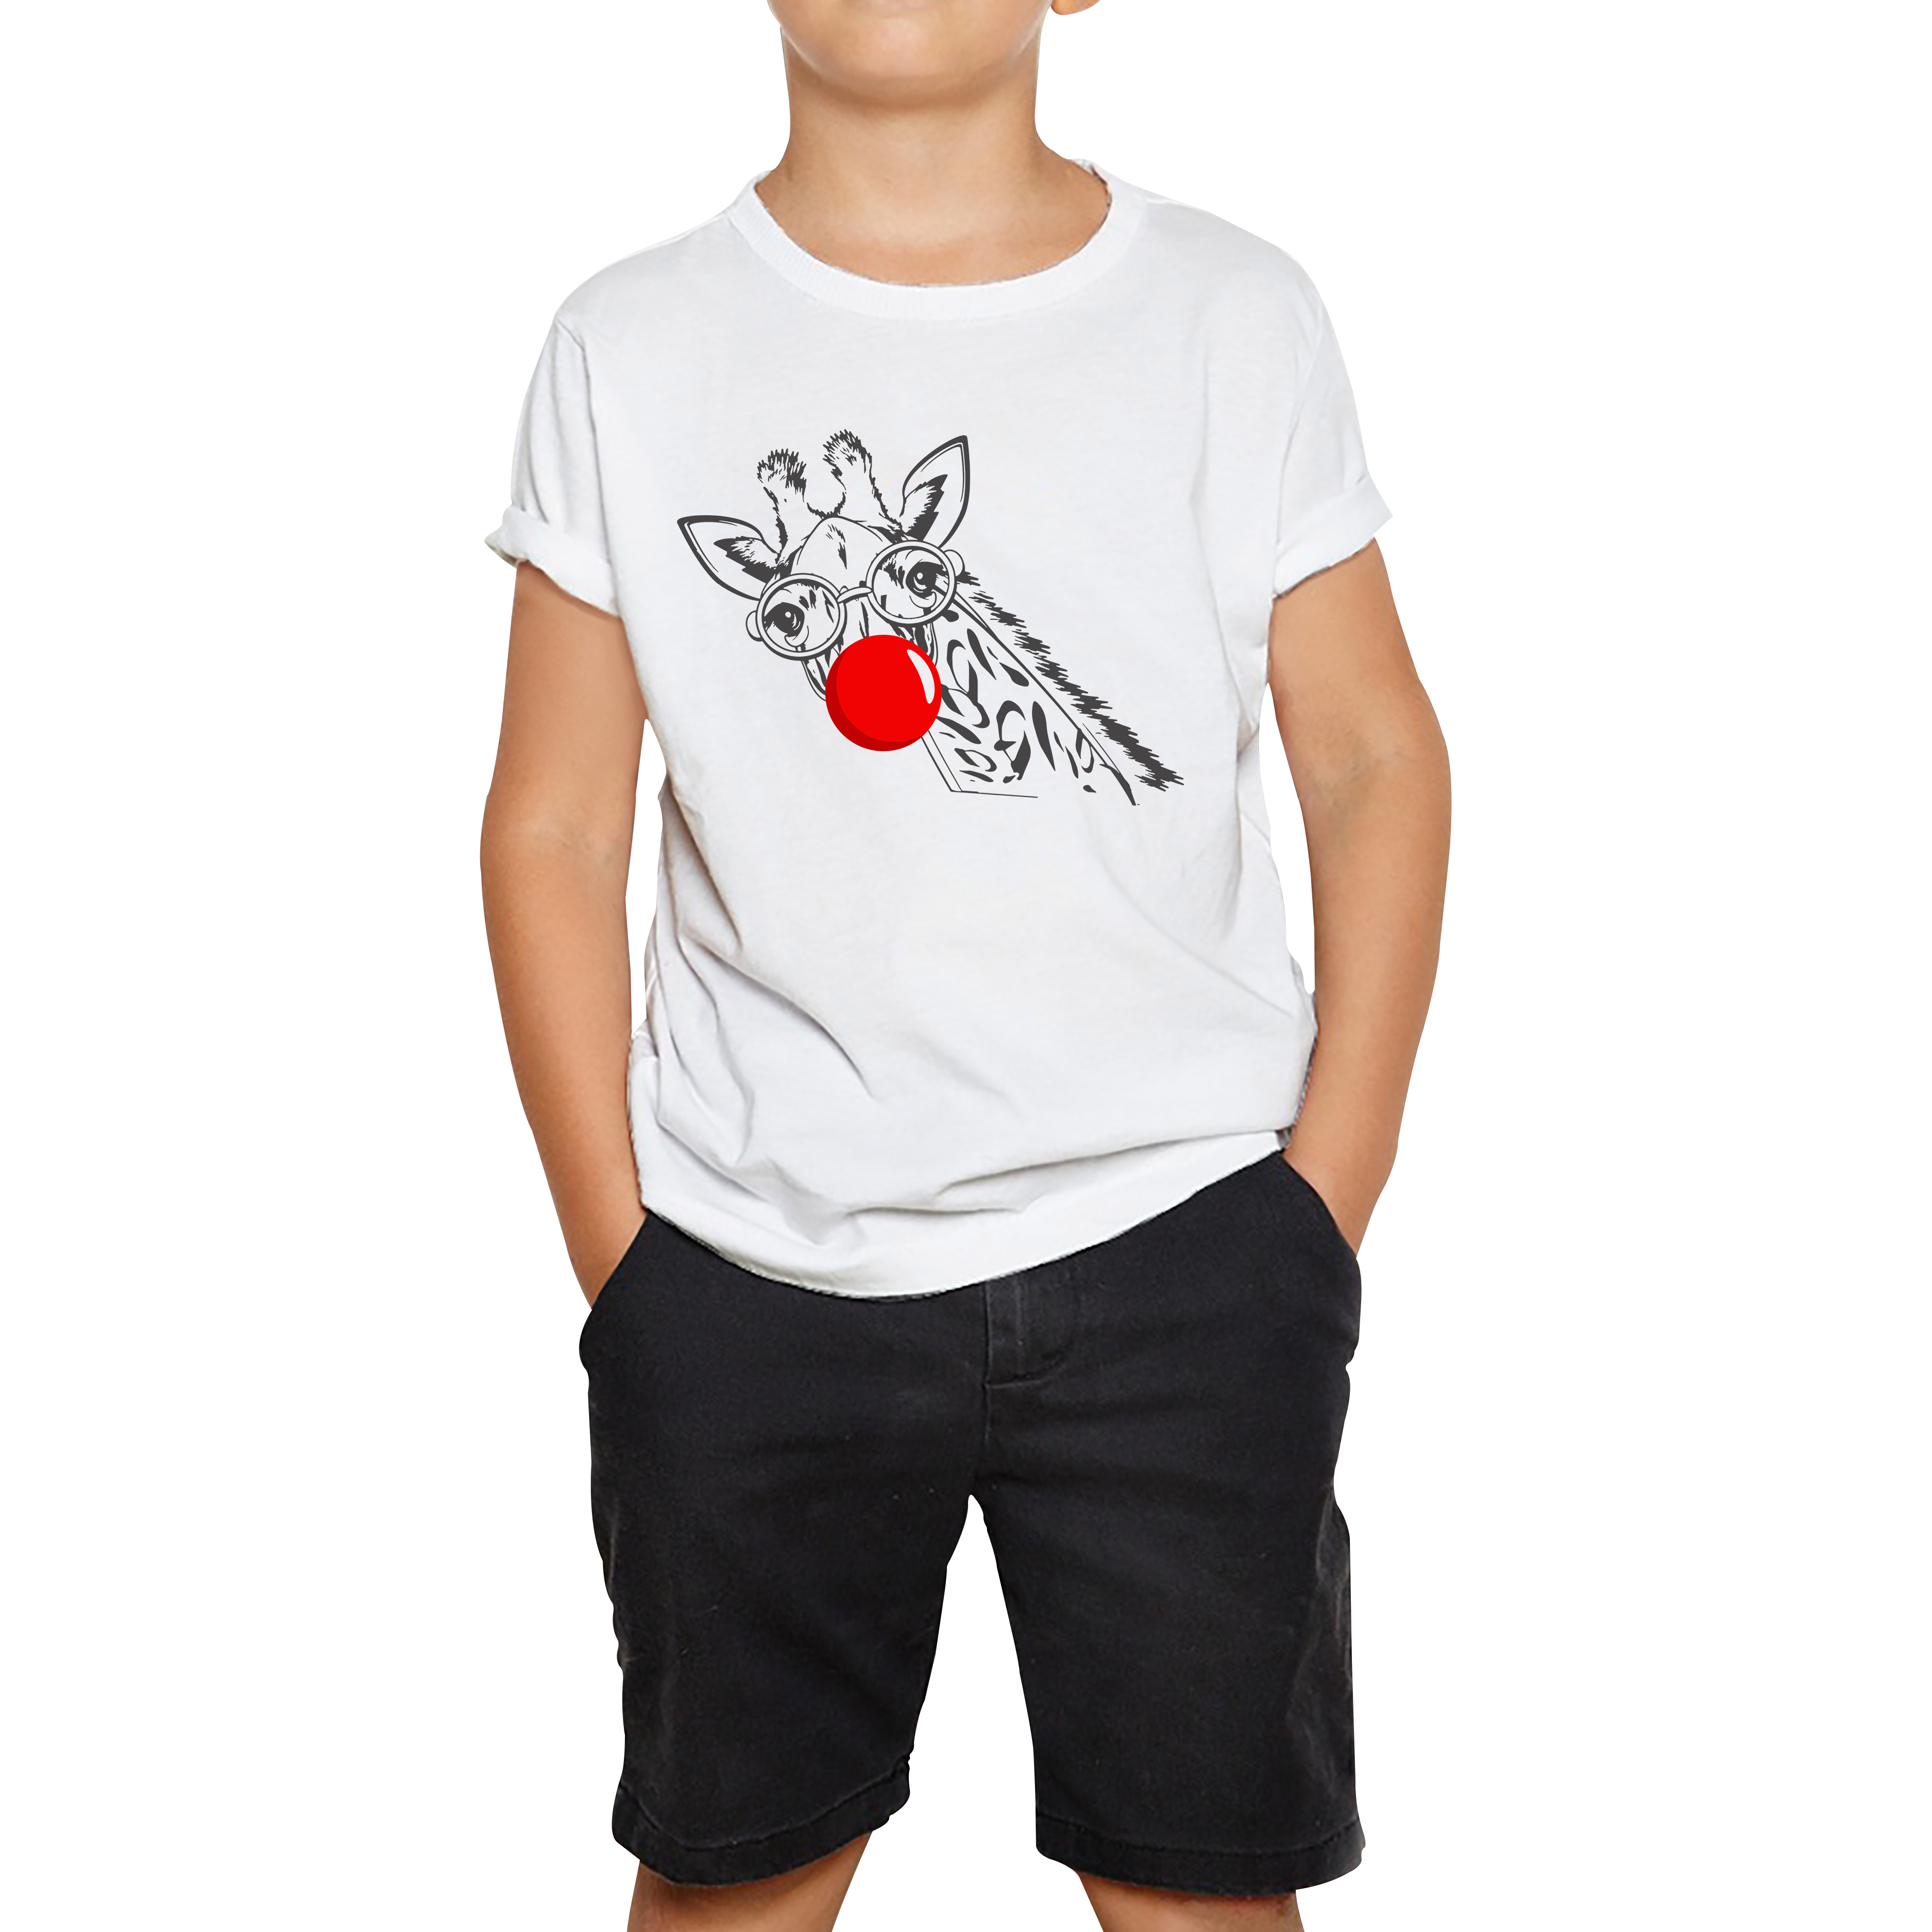 Giraffe Red Nose Day Kids T Shirt. 50% Goes To Charity